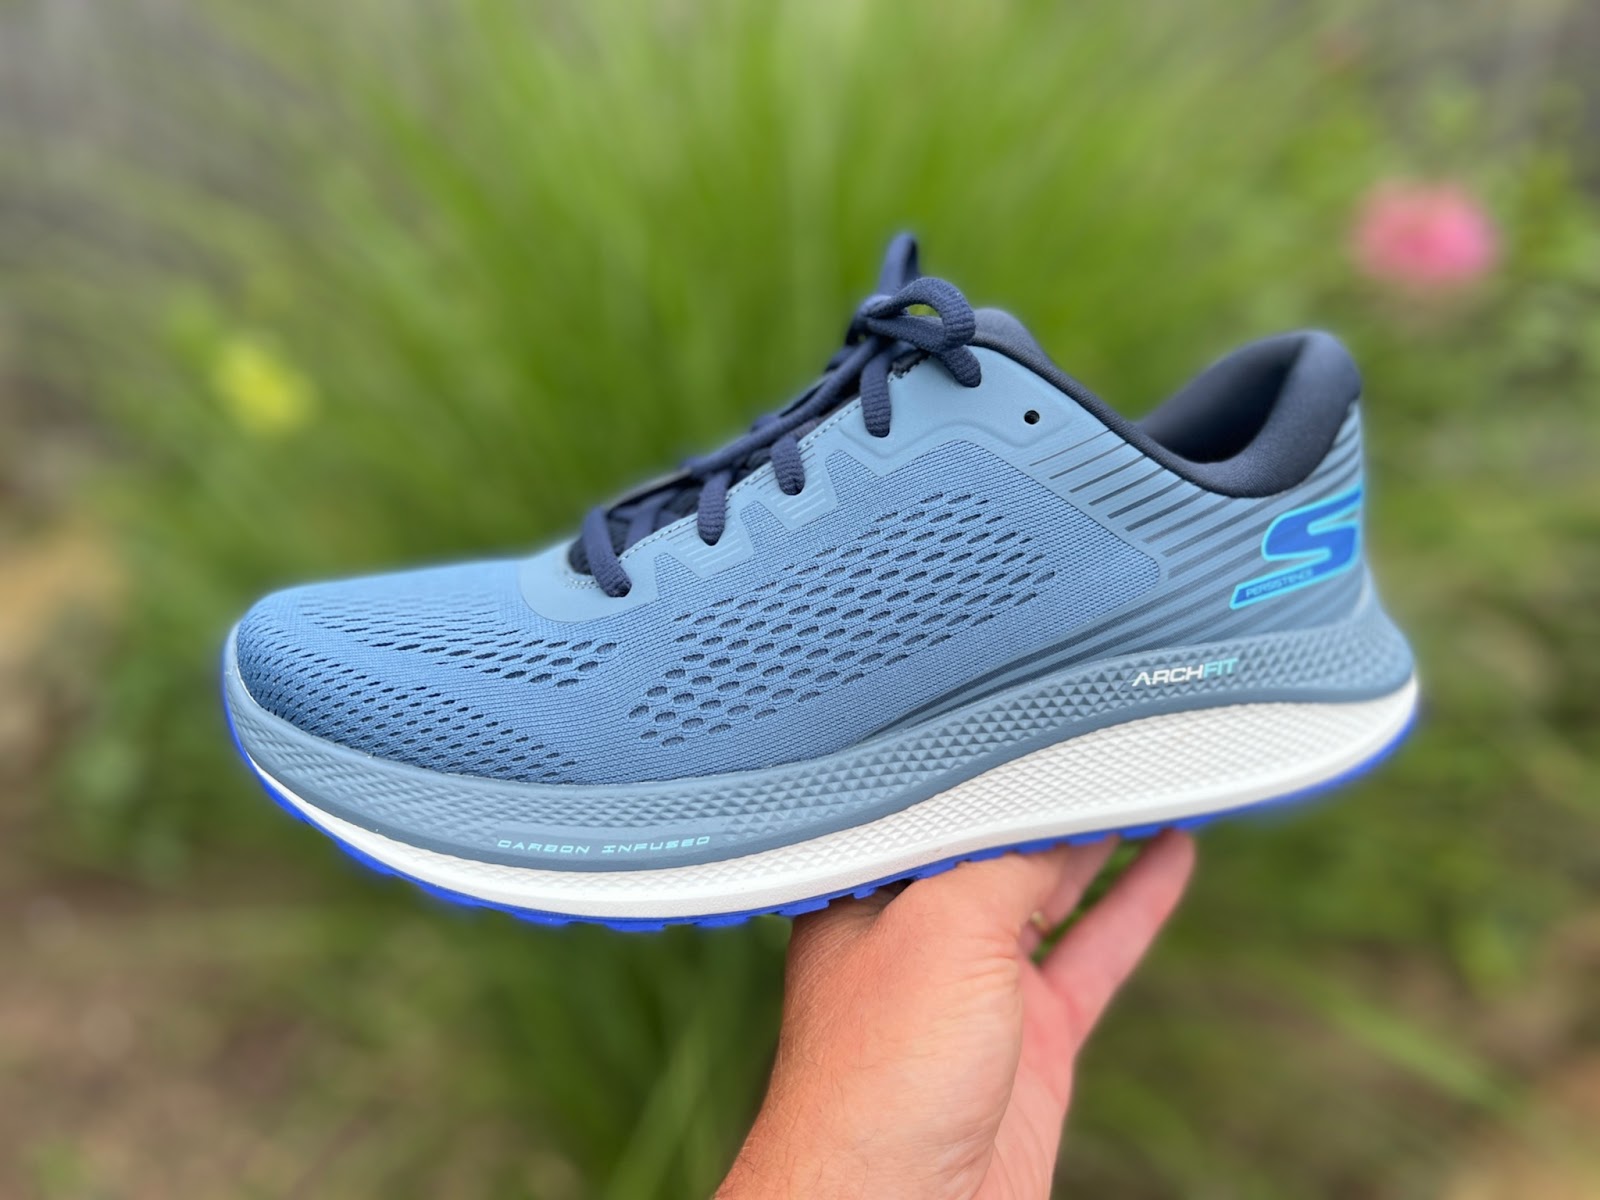 Road Run: Skechers GO Run Persistence Multi Tester Review & New Craft Beer/Shoe Pairing! Comparisons